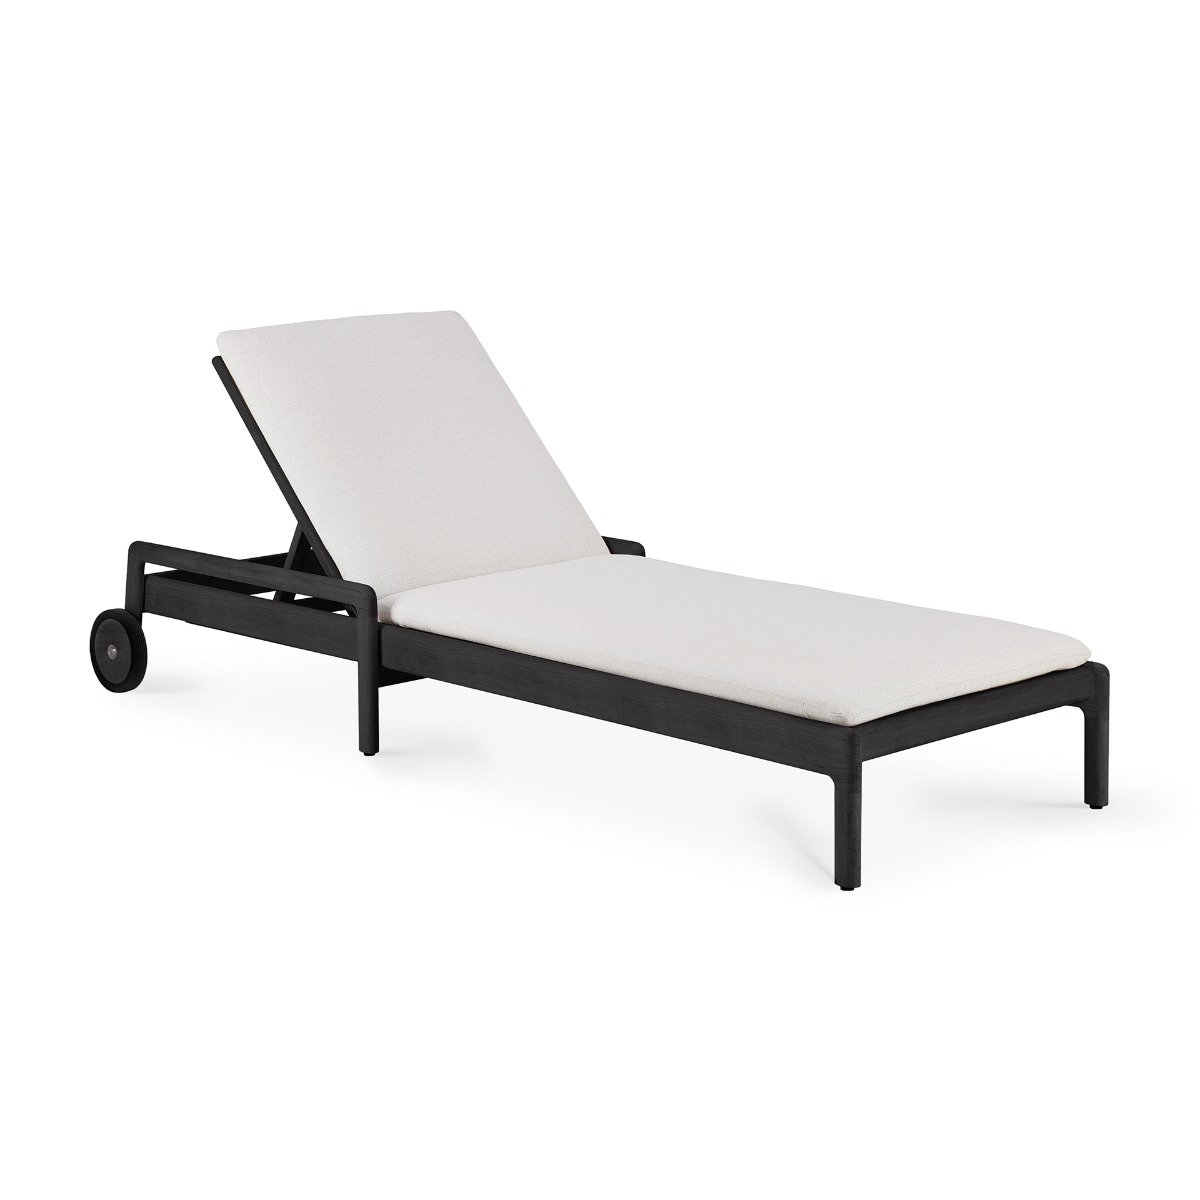 Jack outdoor adjustable lounger varnished teak black Off White fabric with thin cushion